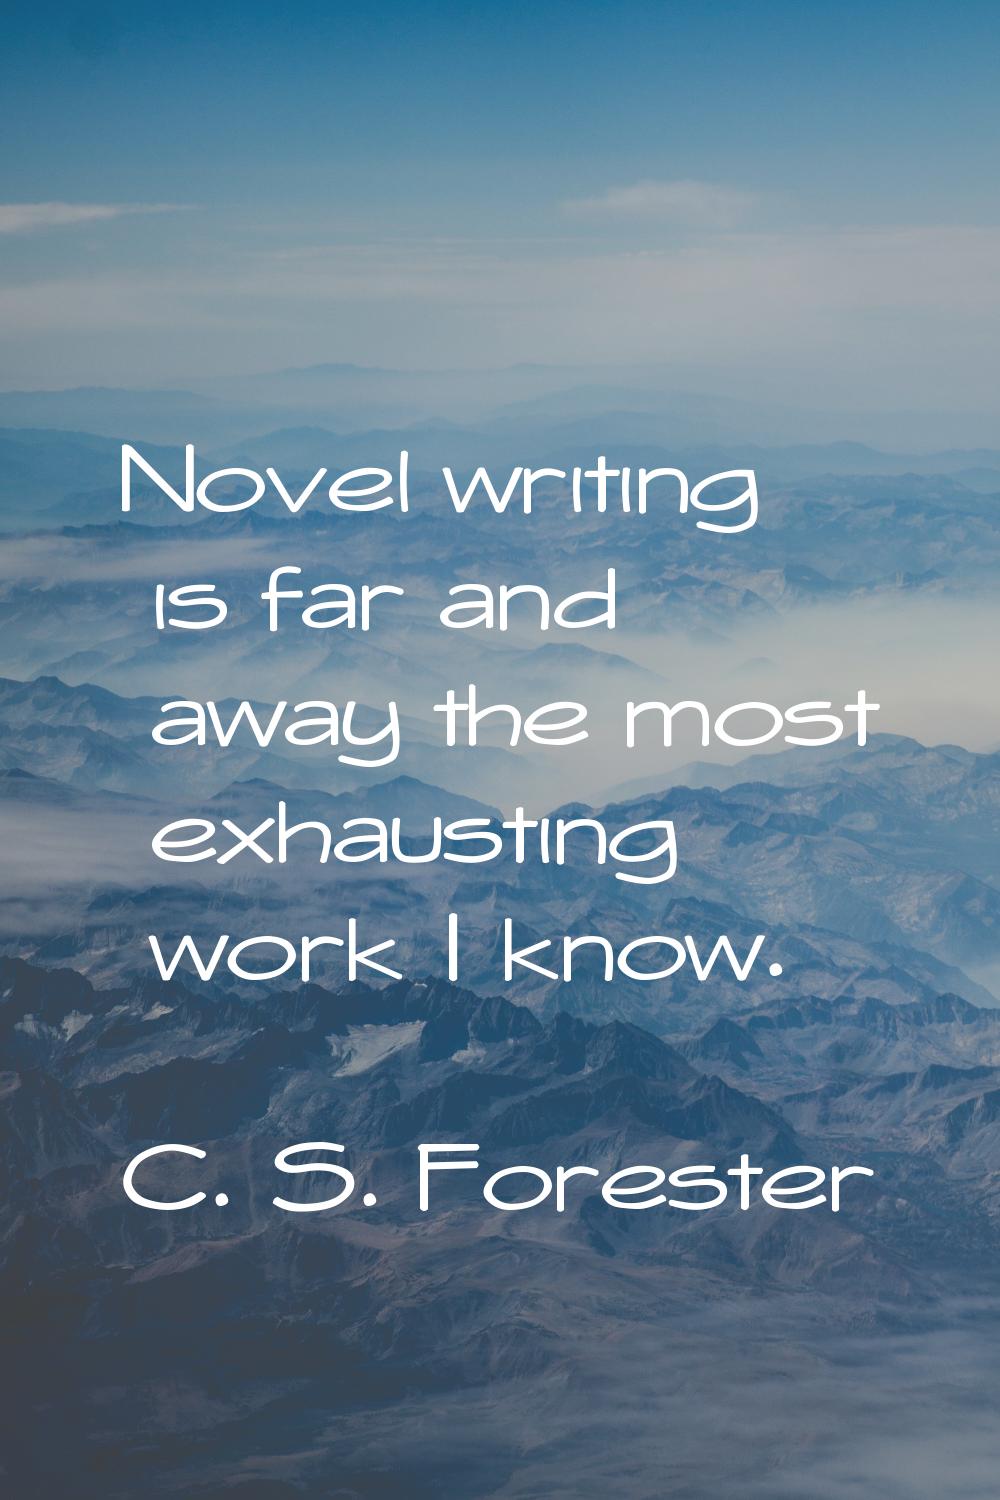 Novel writing is far and away the most exhausting work I know.